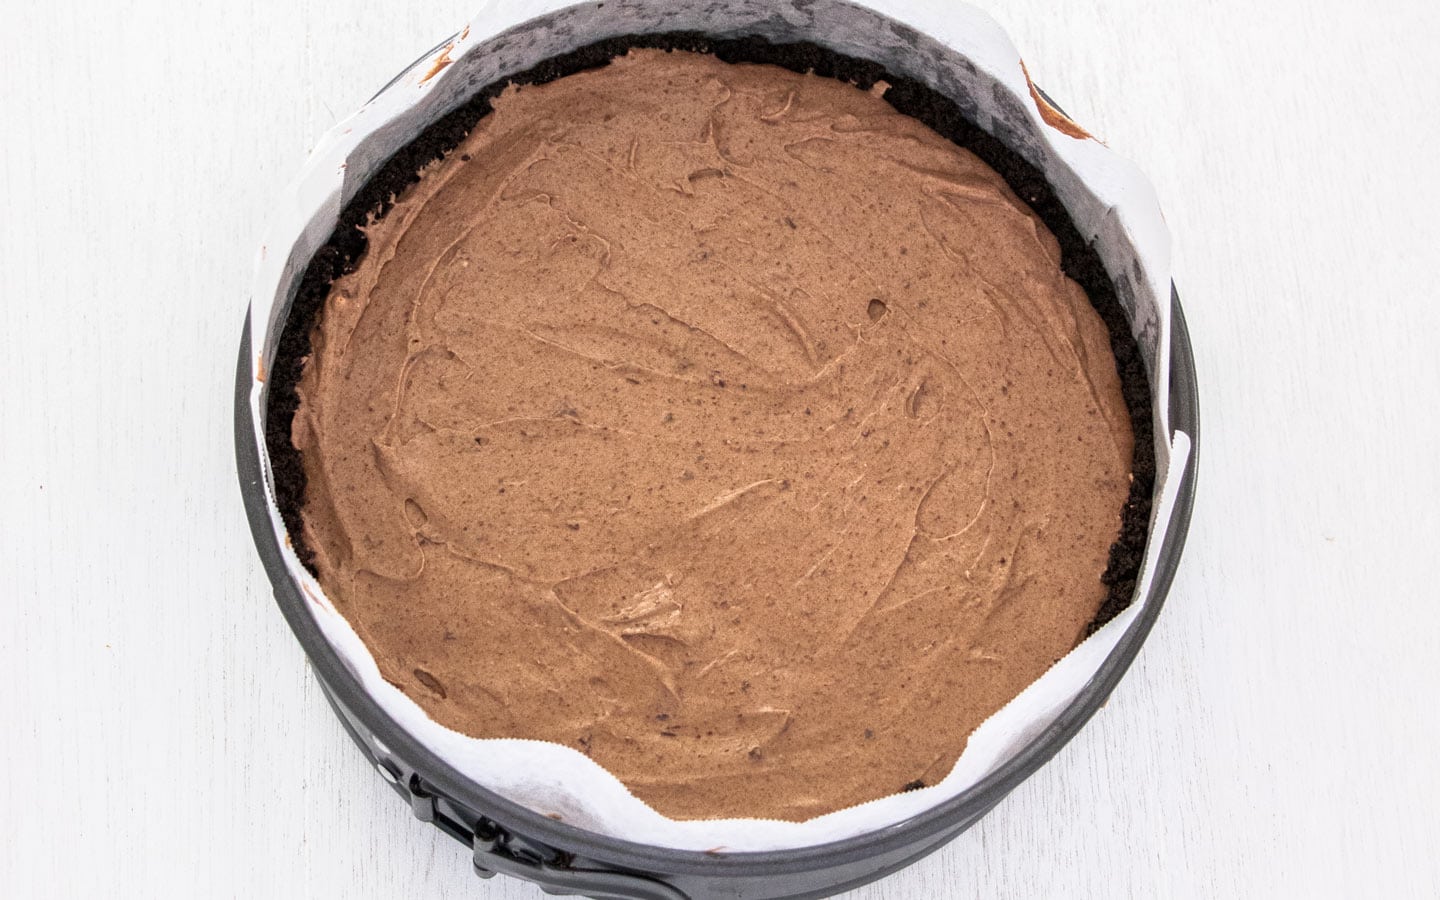 The chocolate cheesecake batter in the pan.